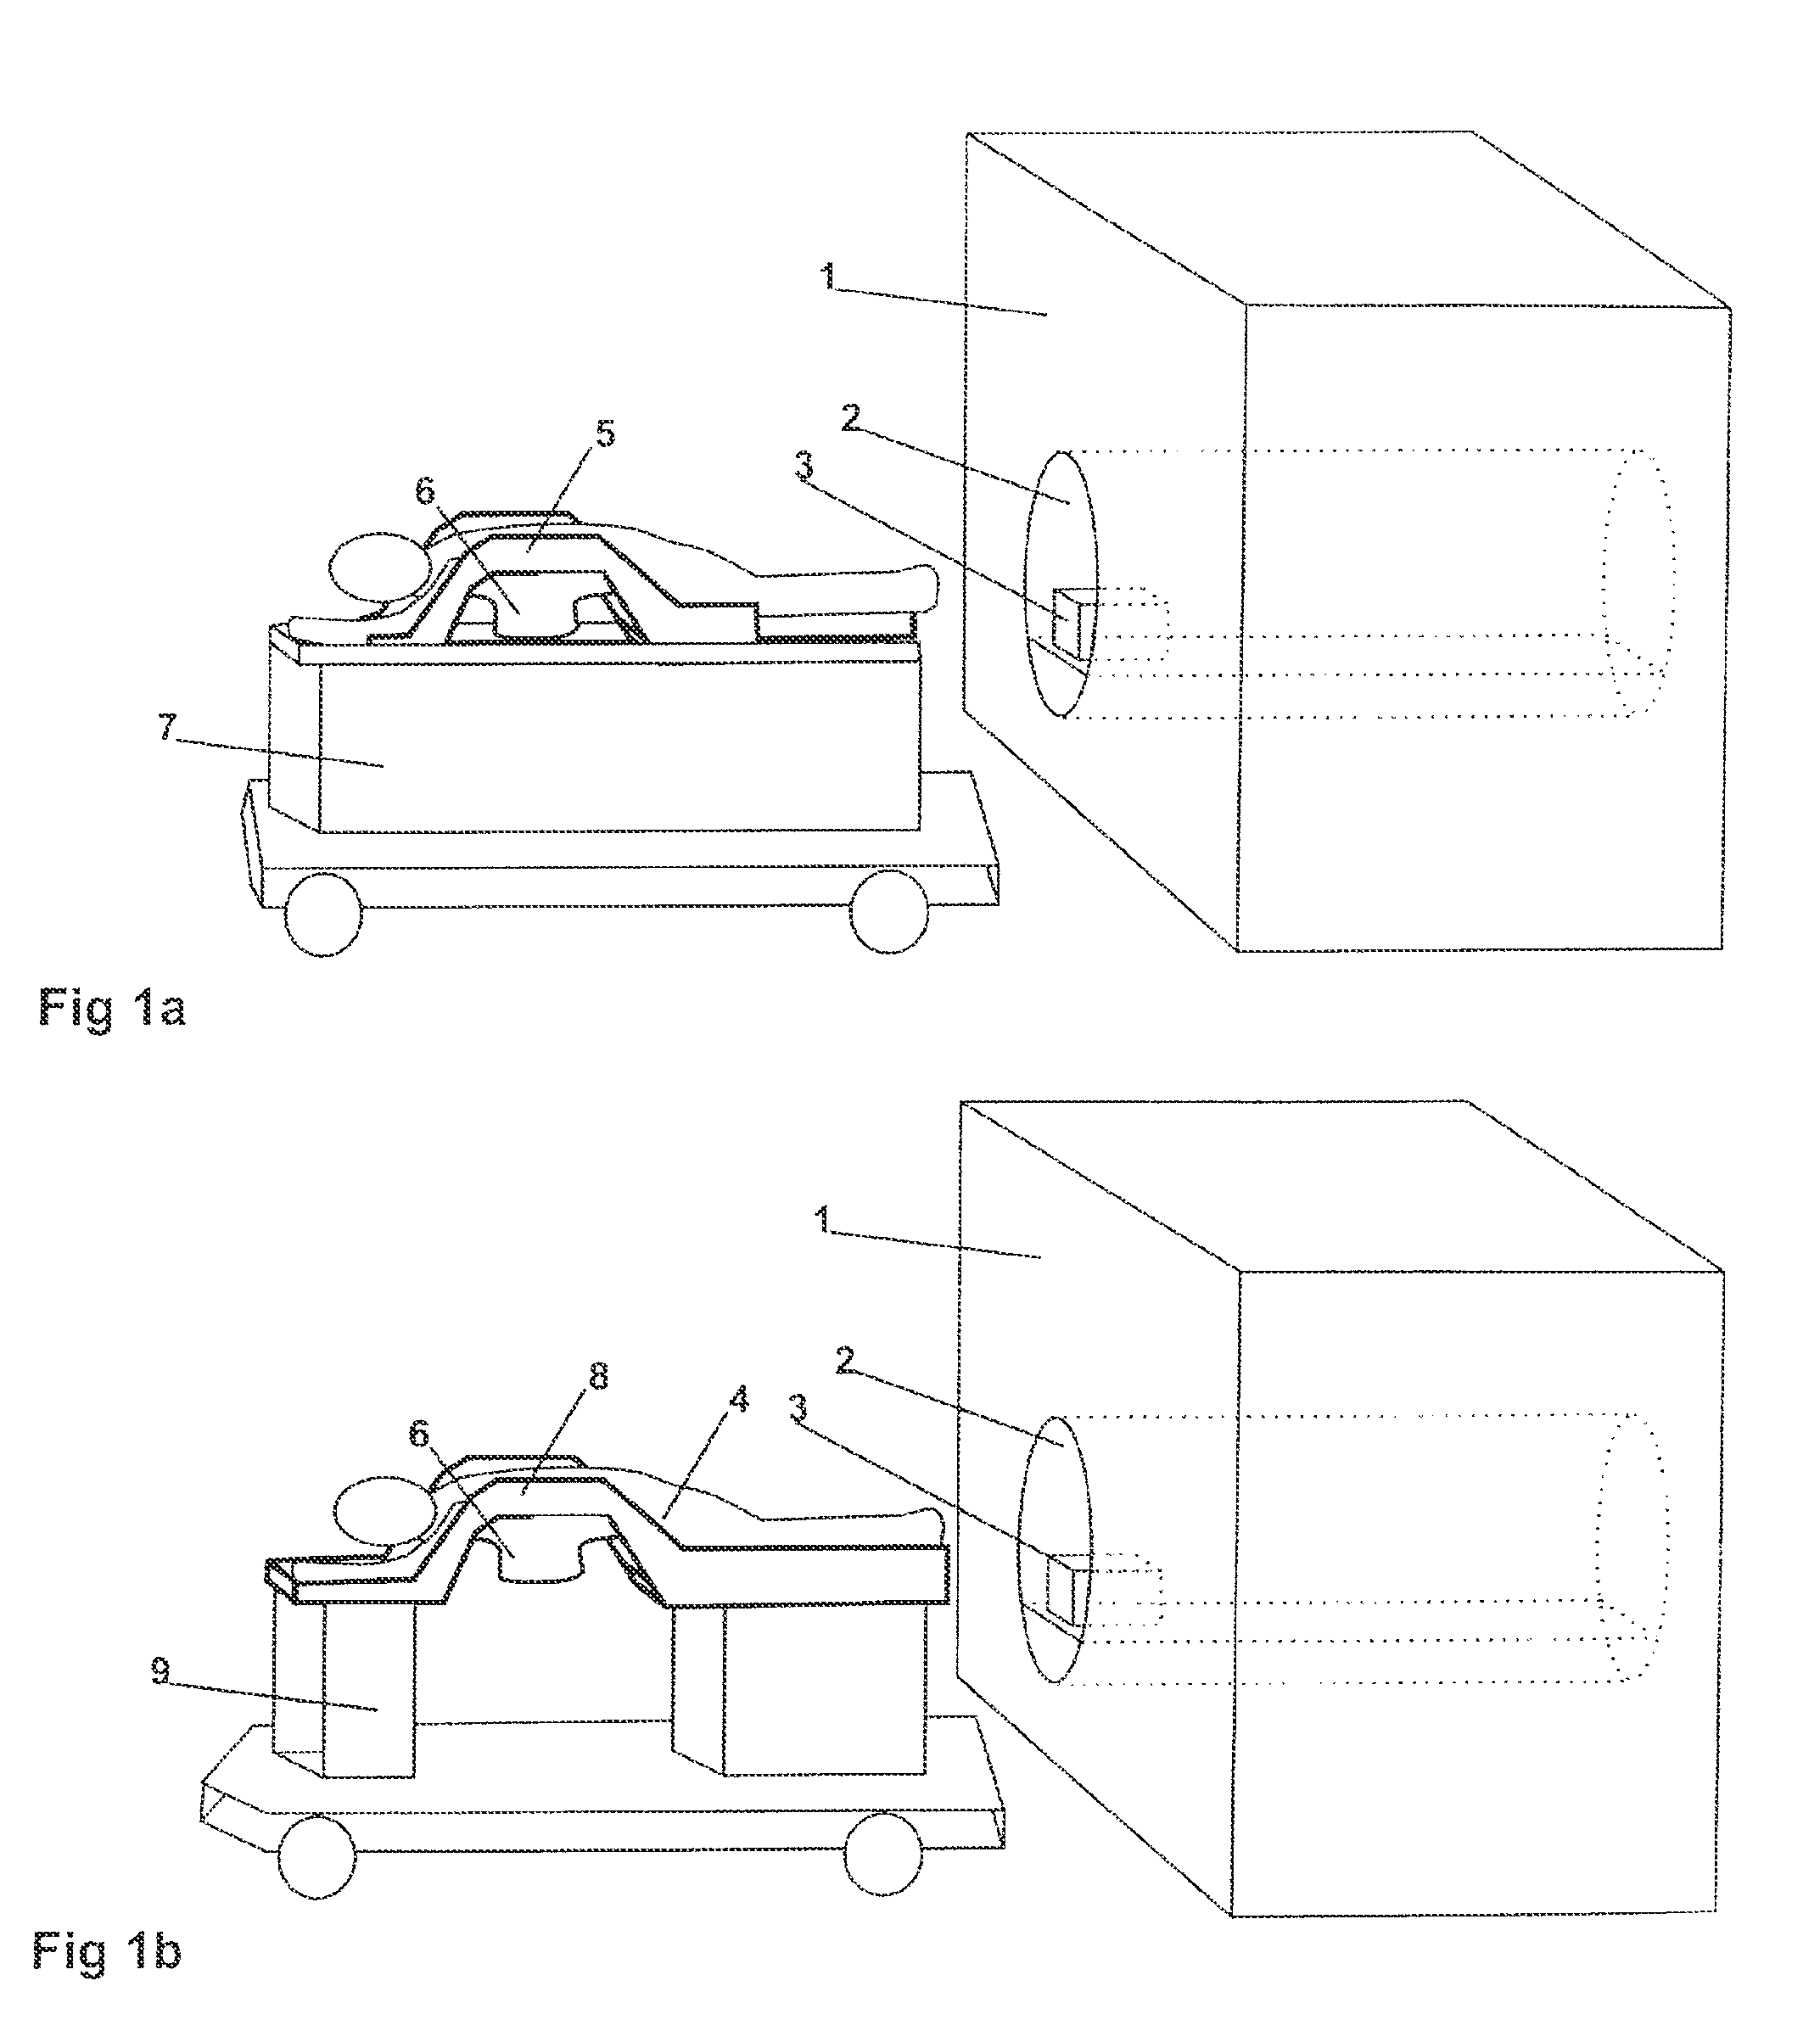 Open architecture imaging apparatus and coil system for magnetic resonance imaging